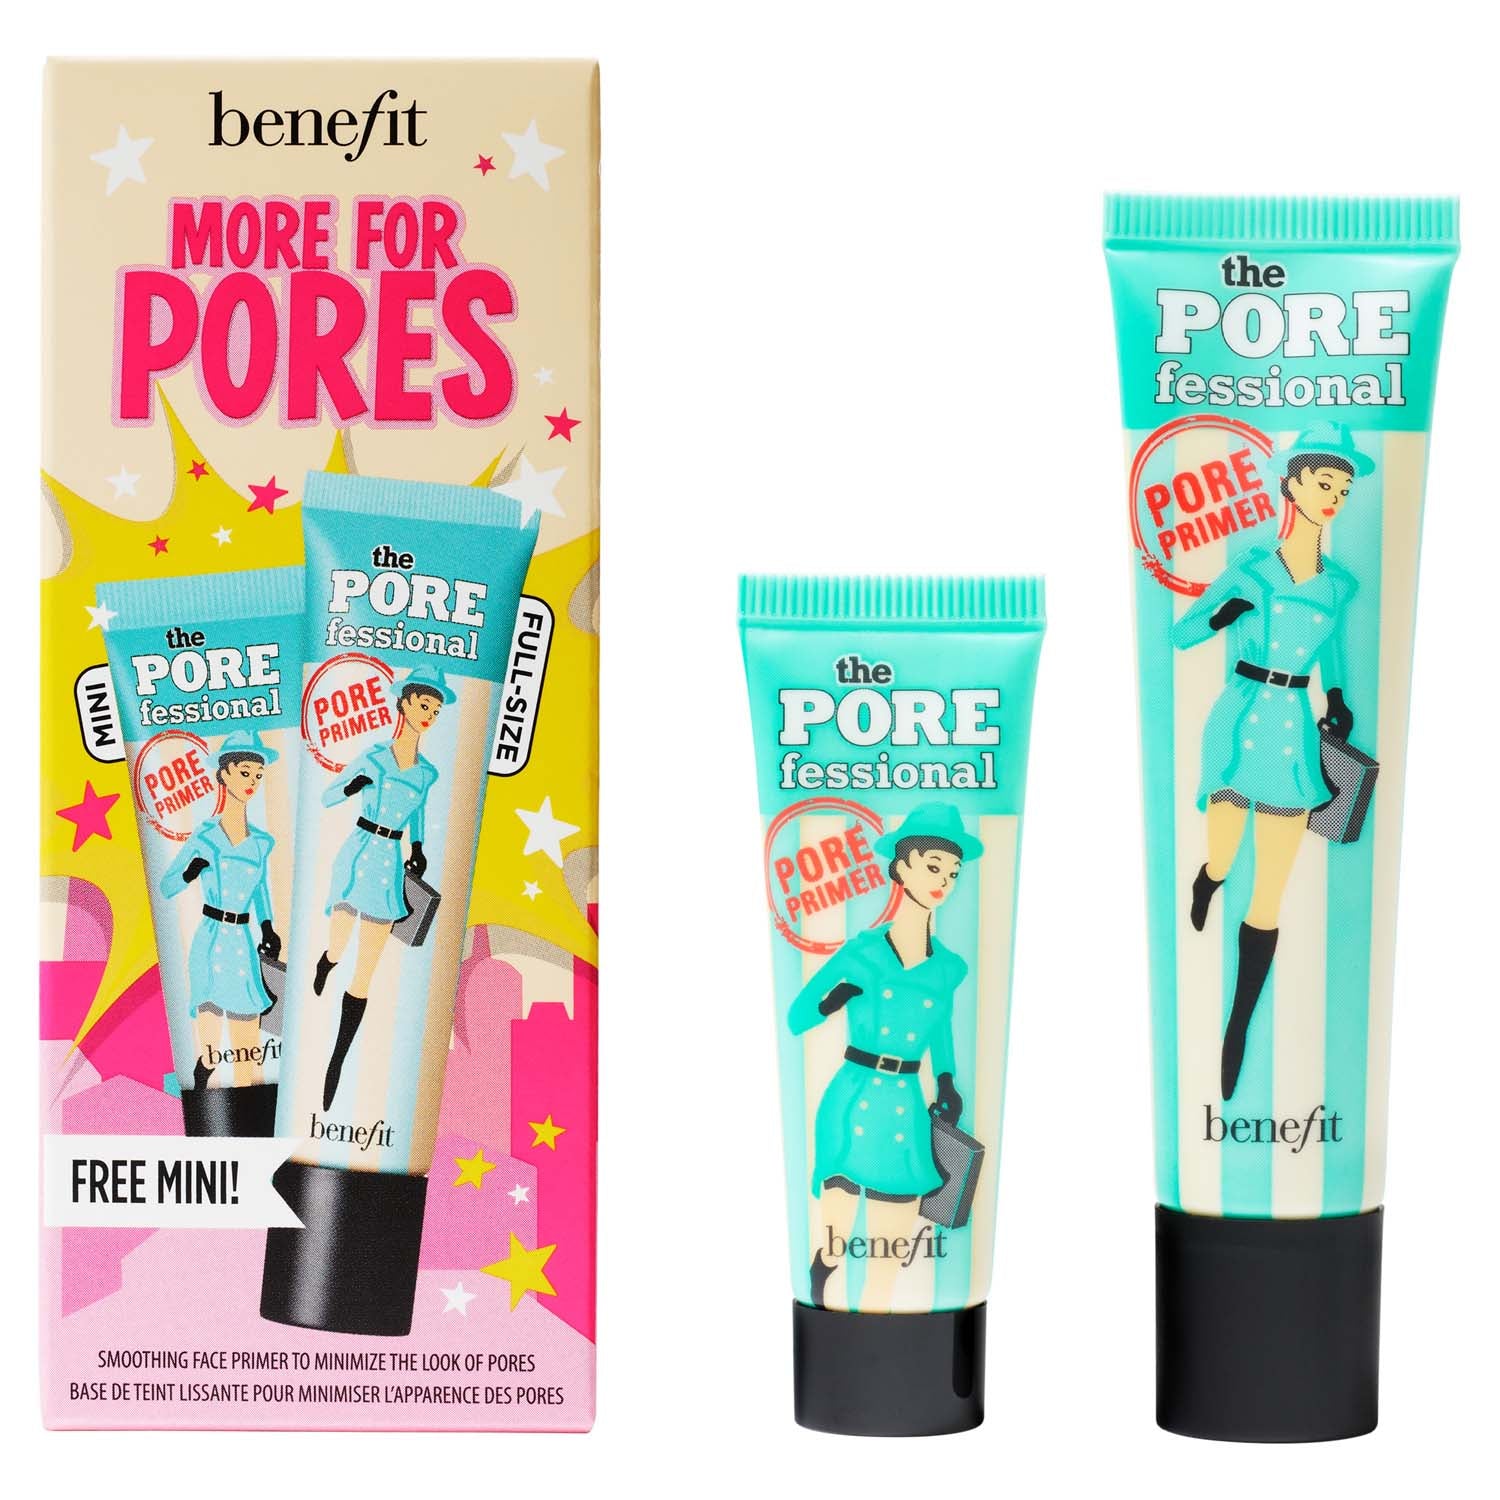 Benefit More For Pores Set 1 Shaws Department Stores